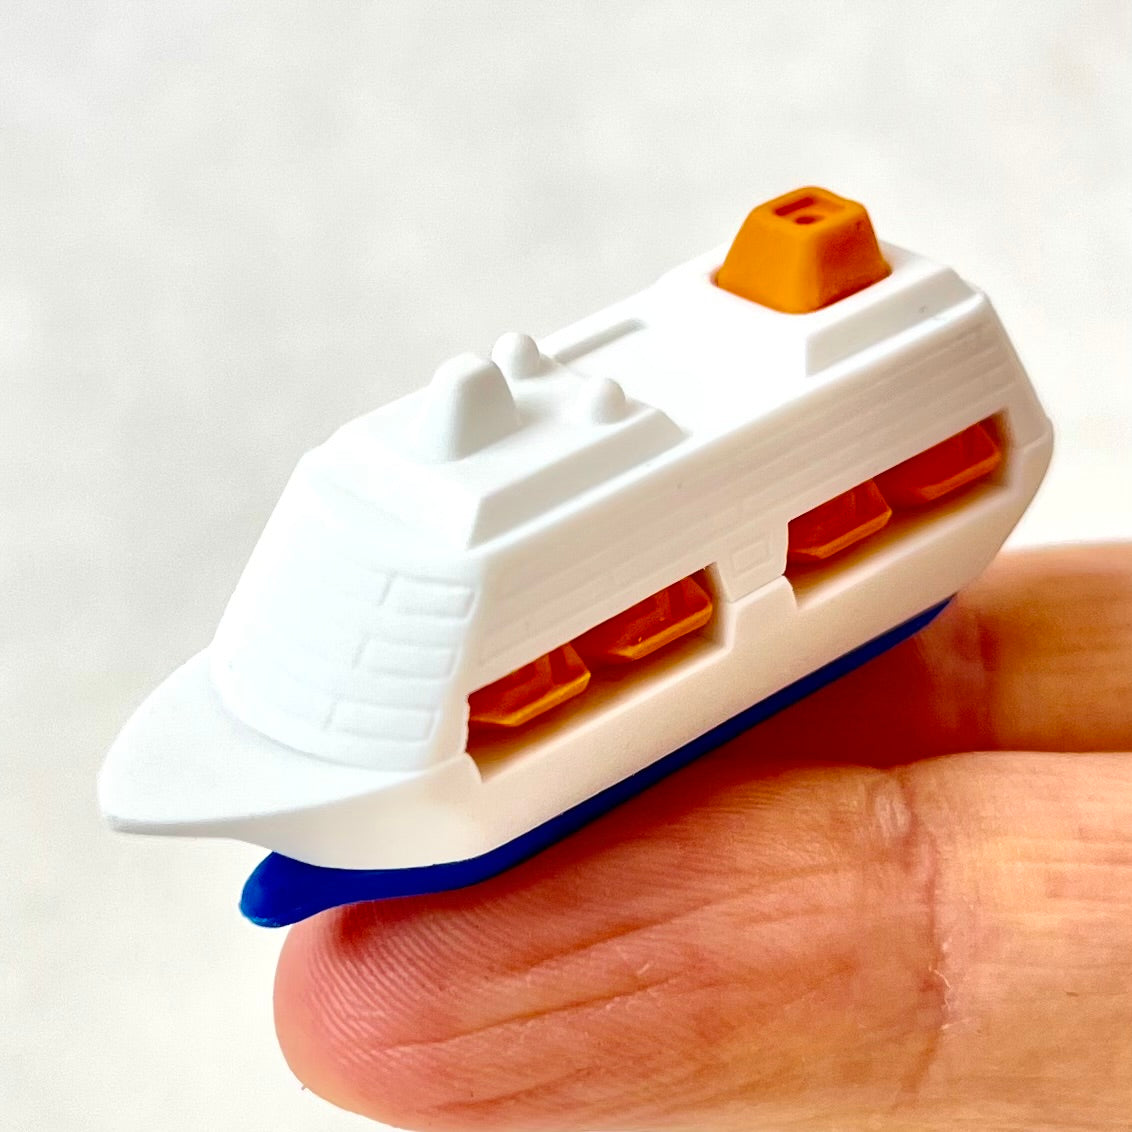 381361 AIRPLANE, HELICOPTER & CRUISE SHIP ERASERS-30